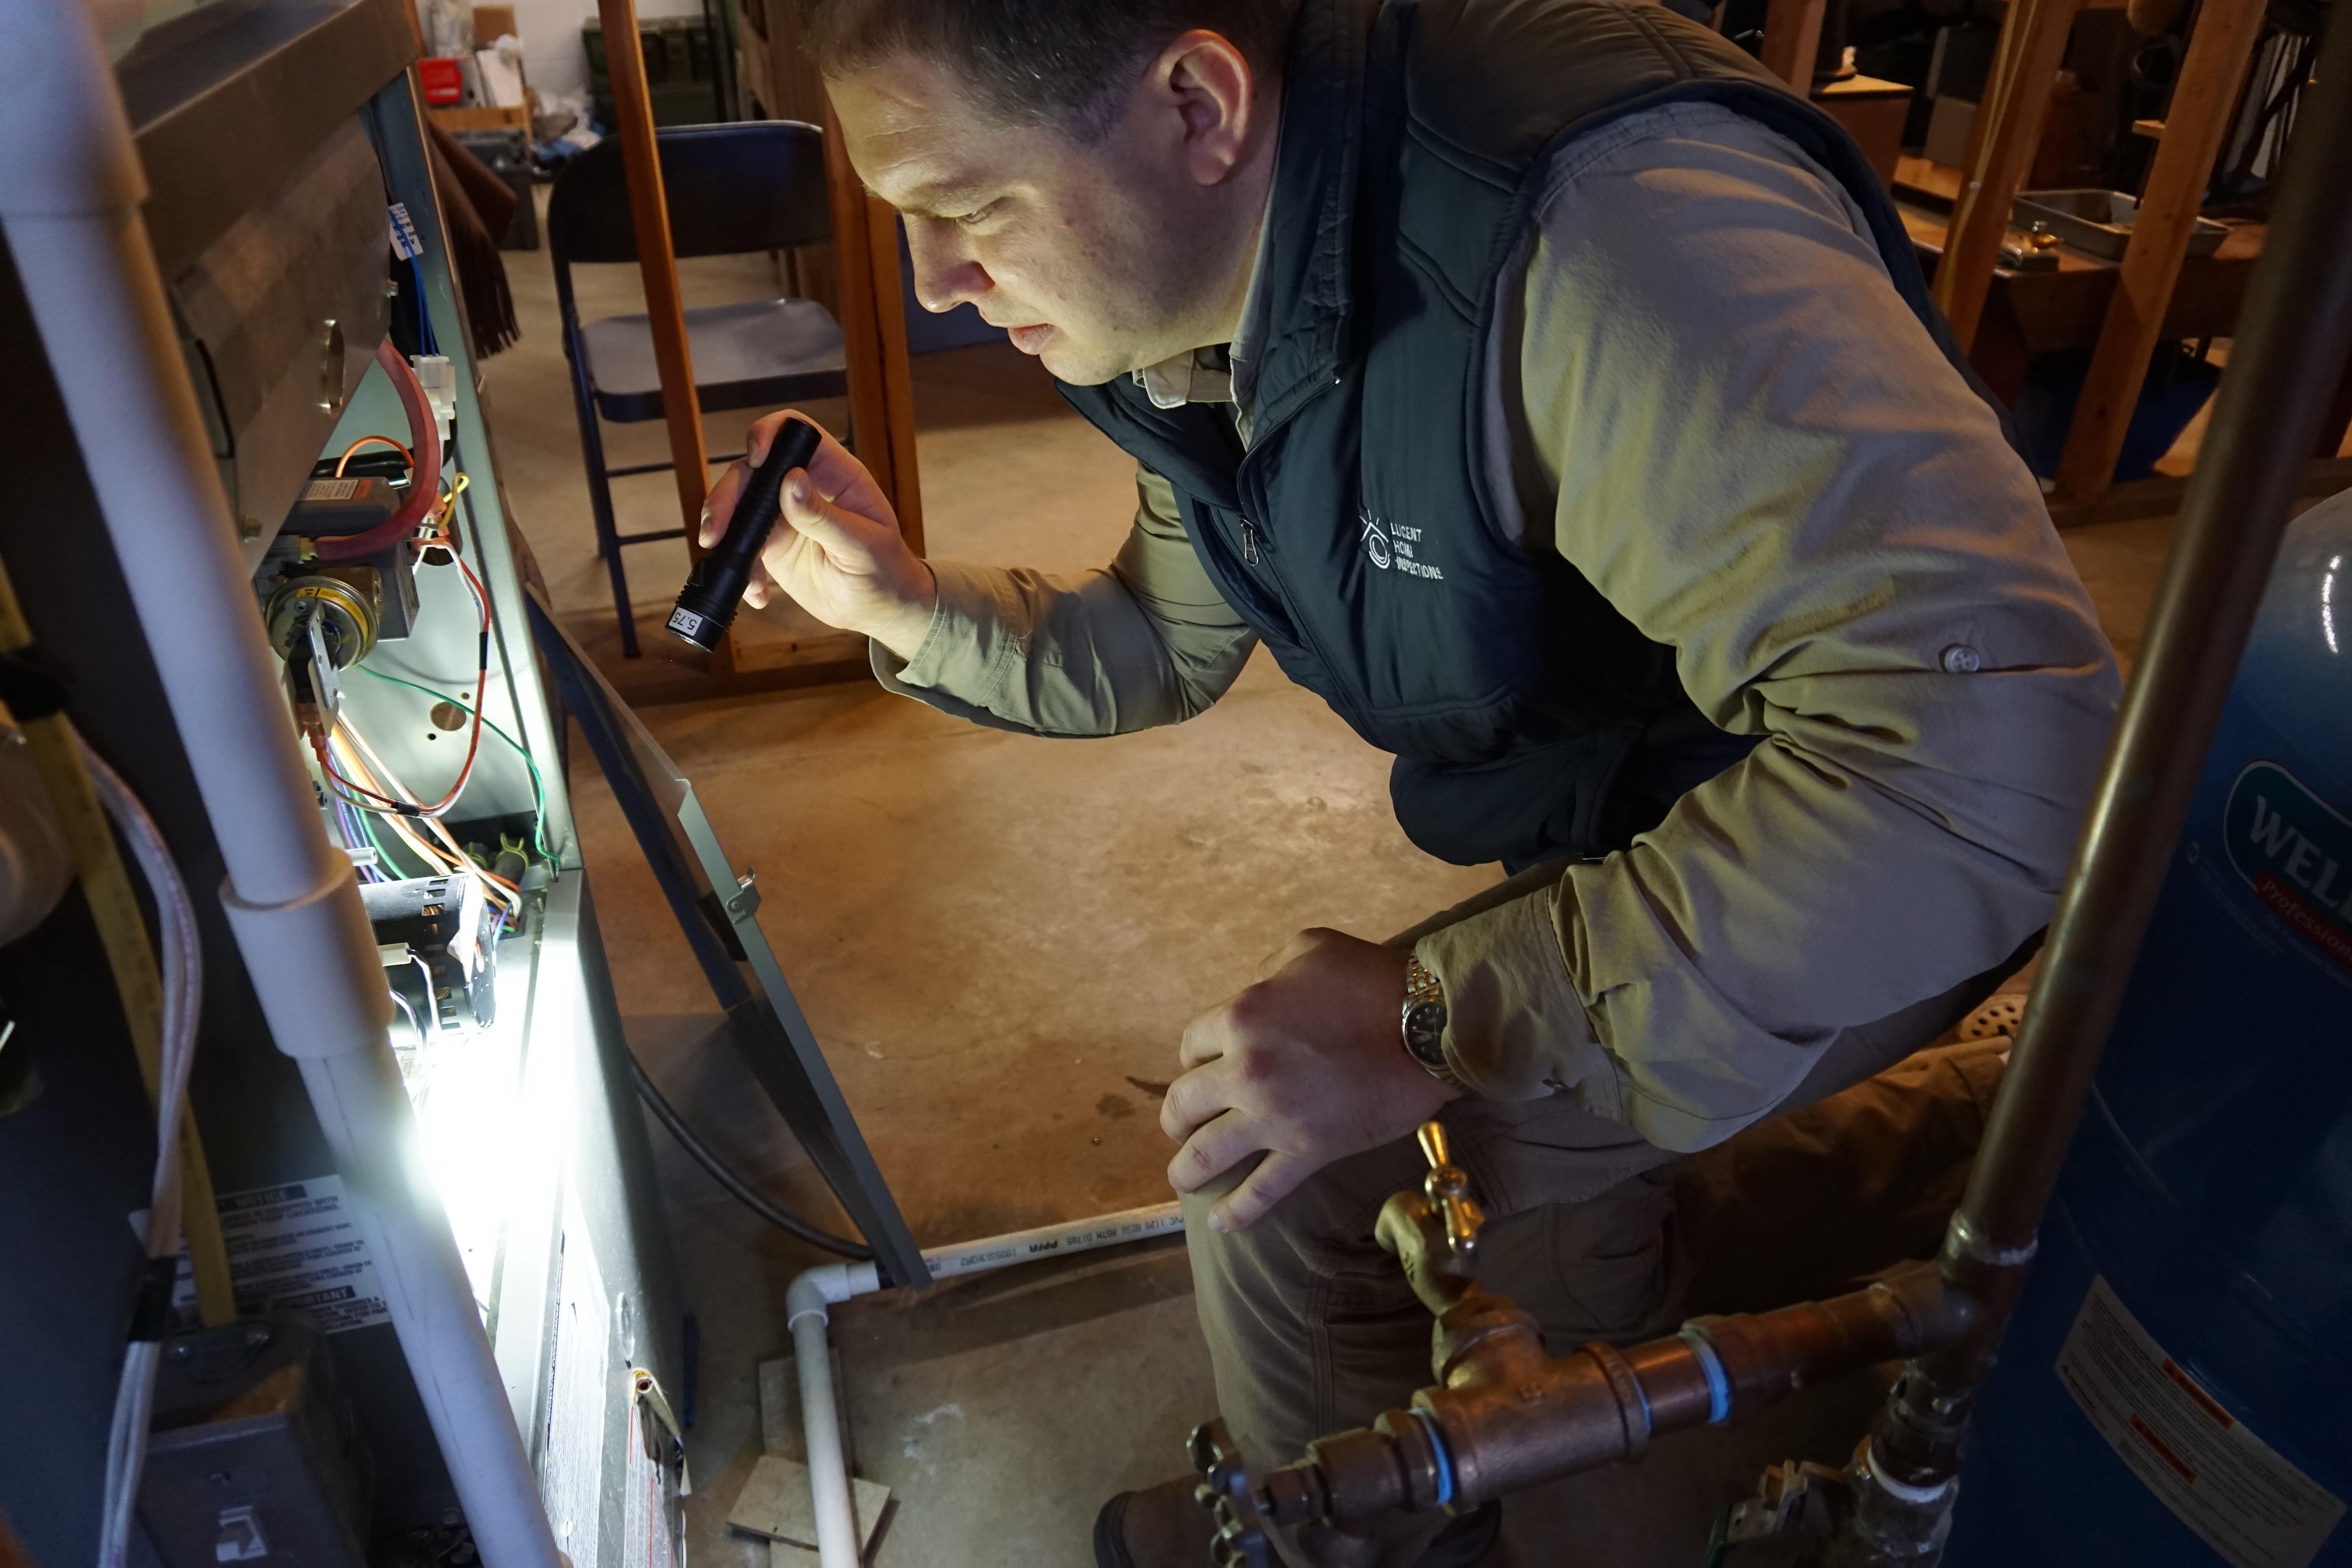 Inspecting the furnace (air handler)